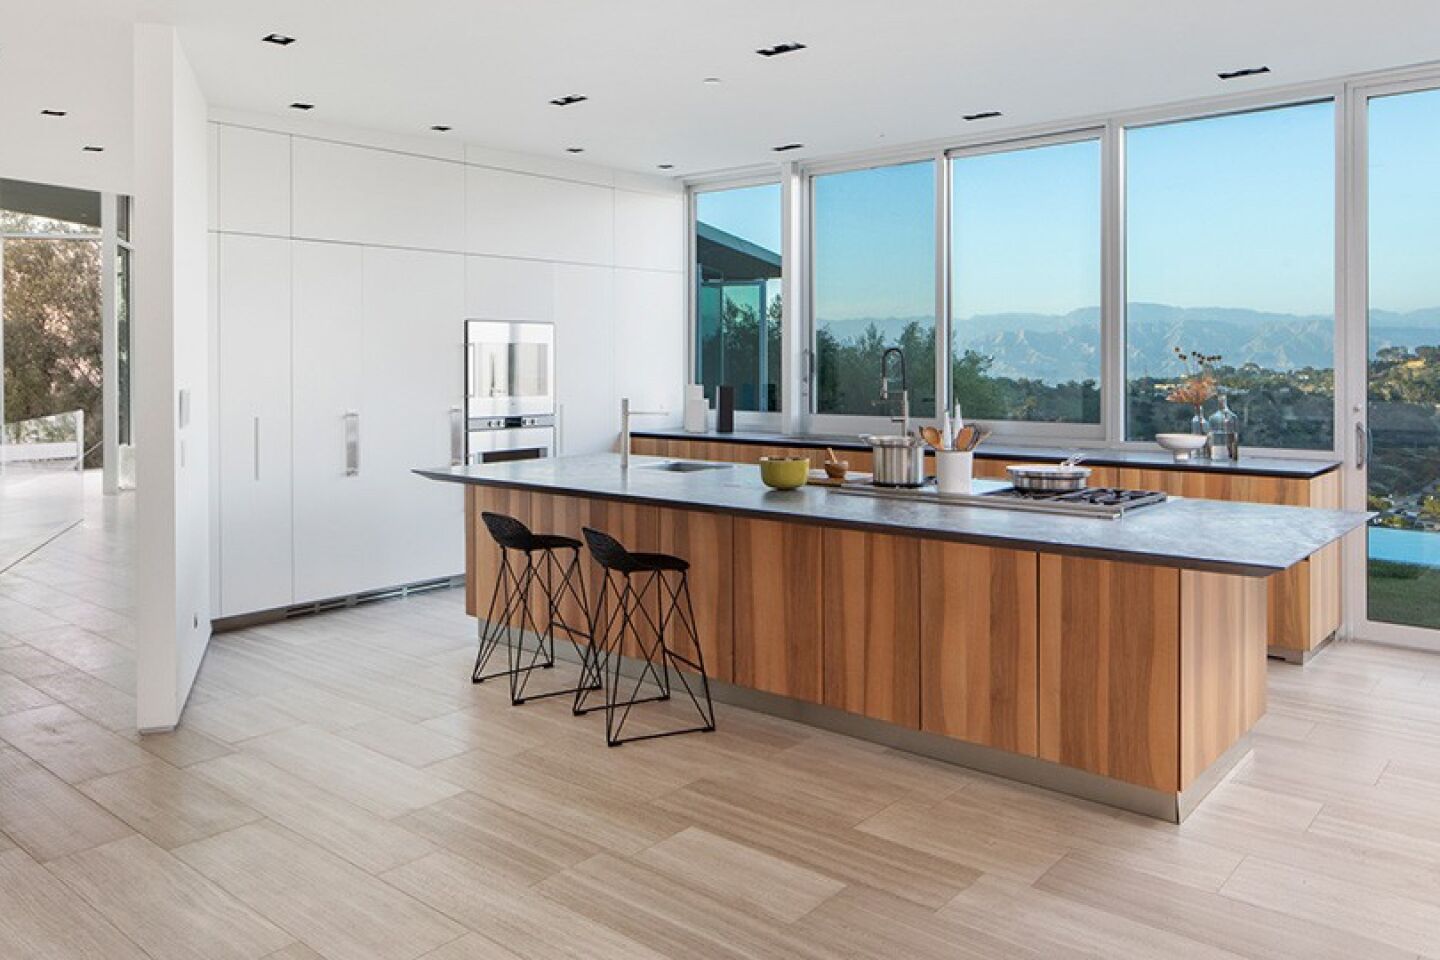 The kitchen has an island and views of the outdoors.